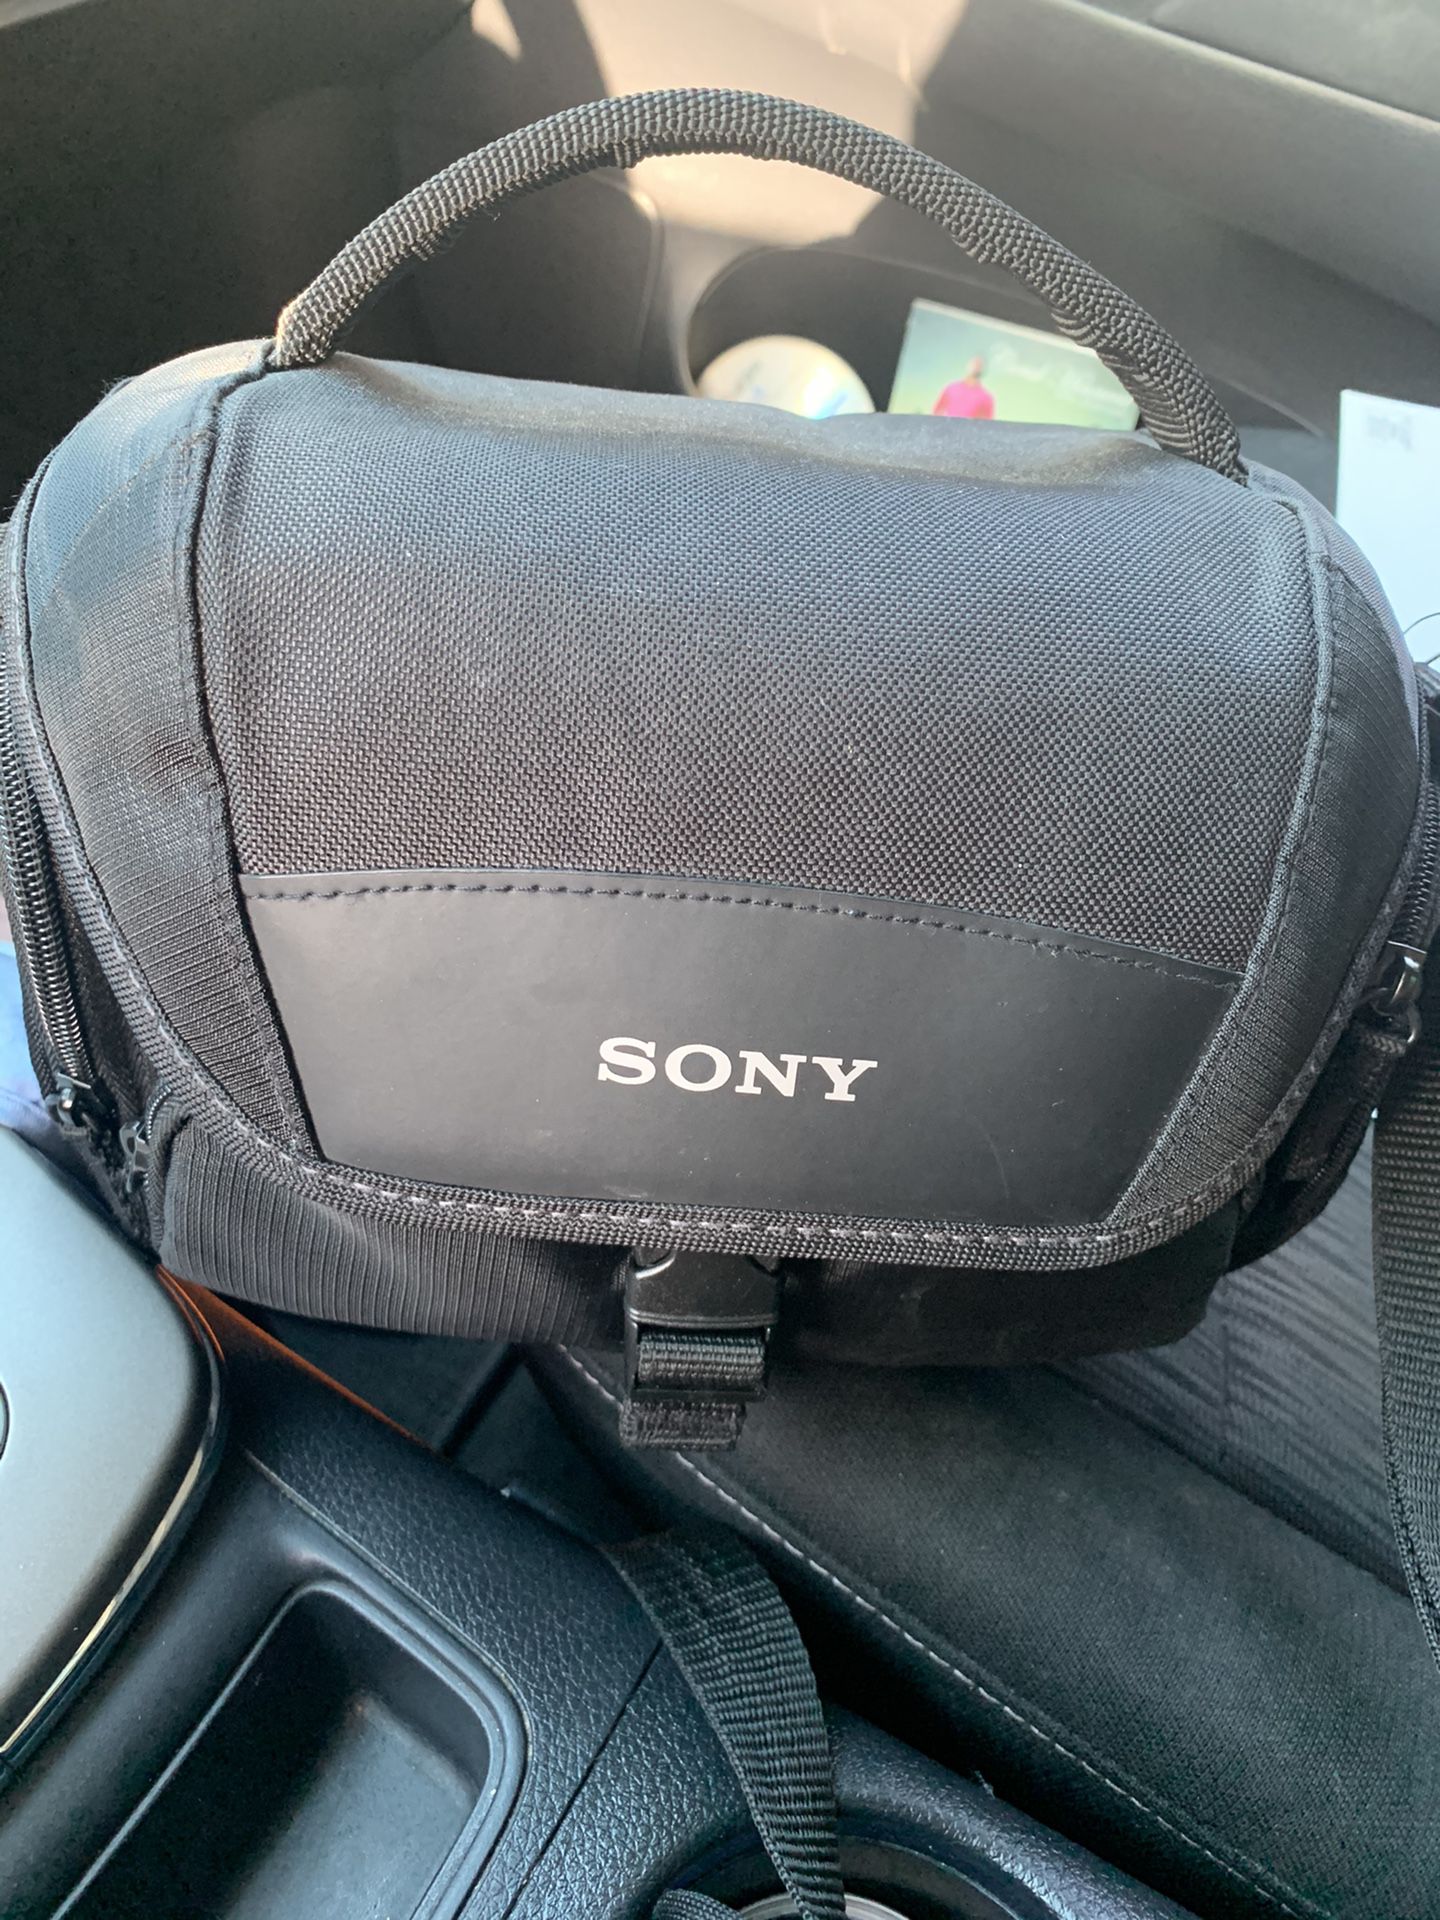 Sony alpha 6000 with 4K and wifi capability with two lenses and bag and strap